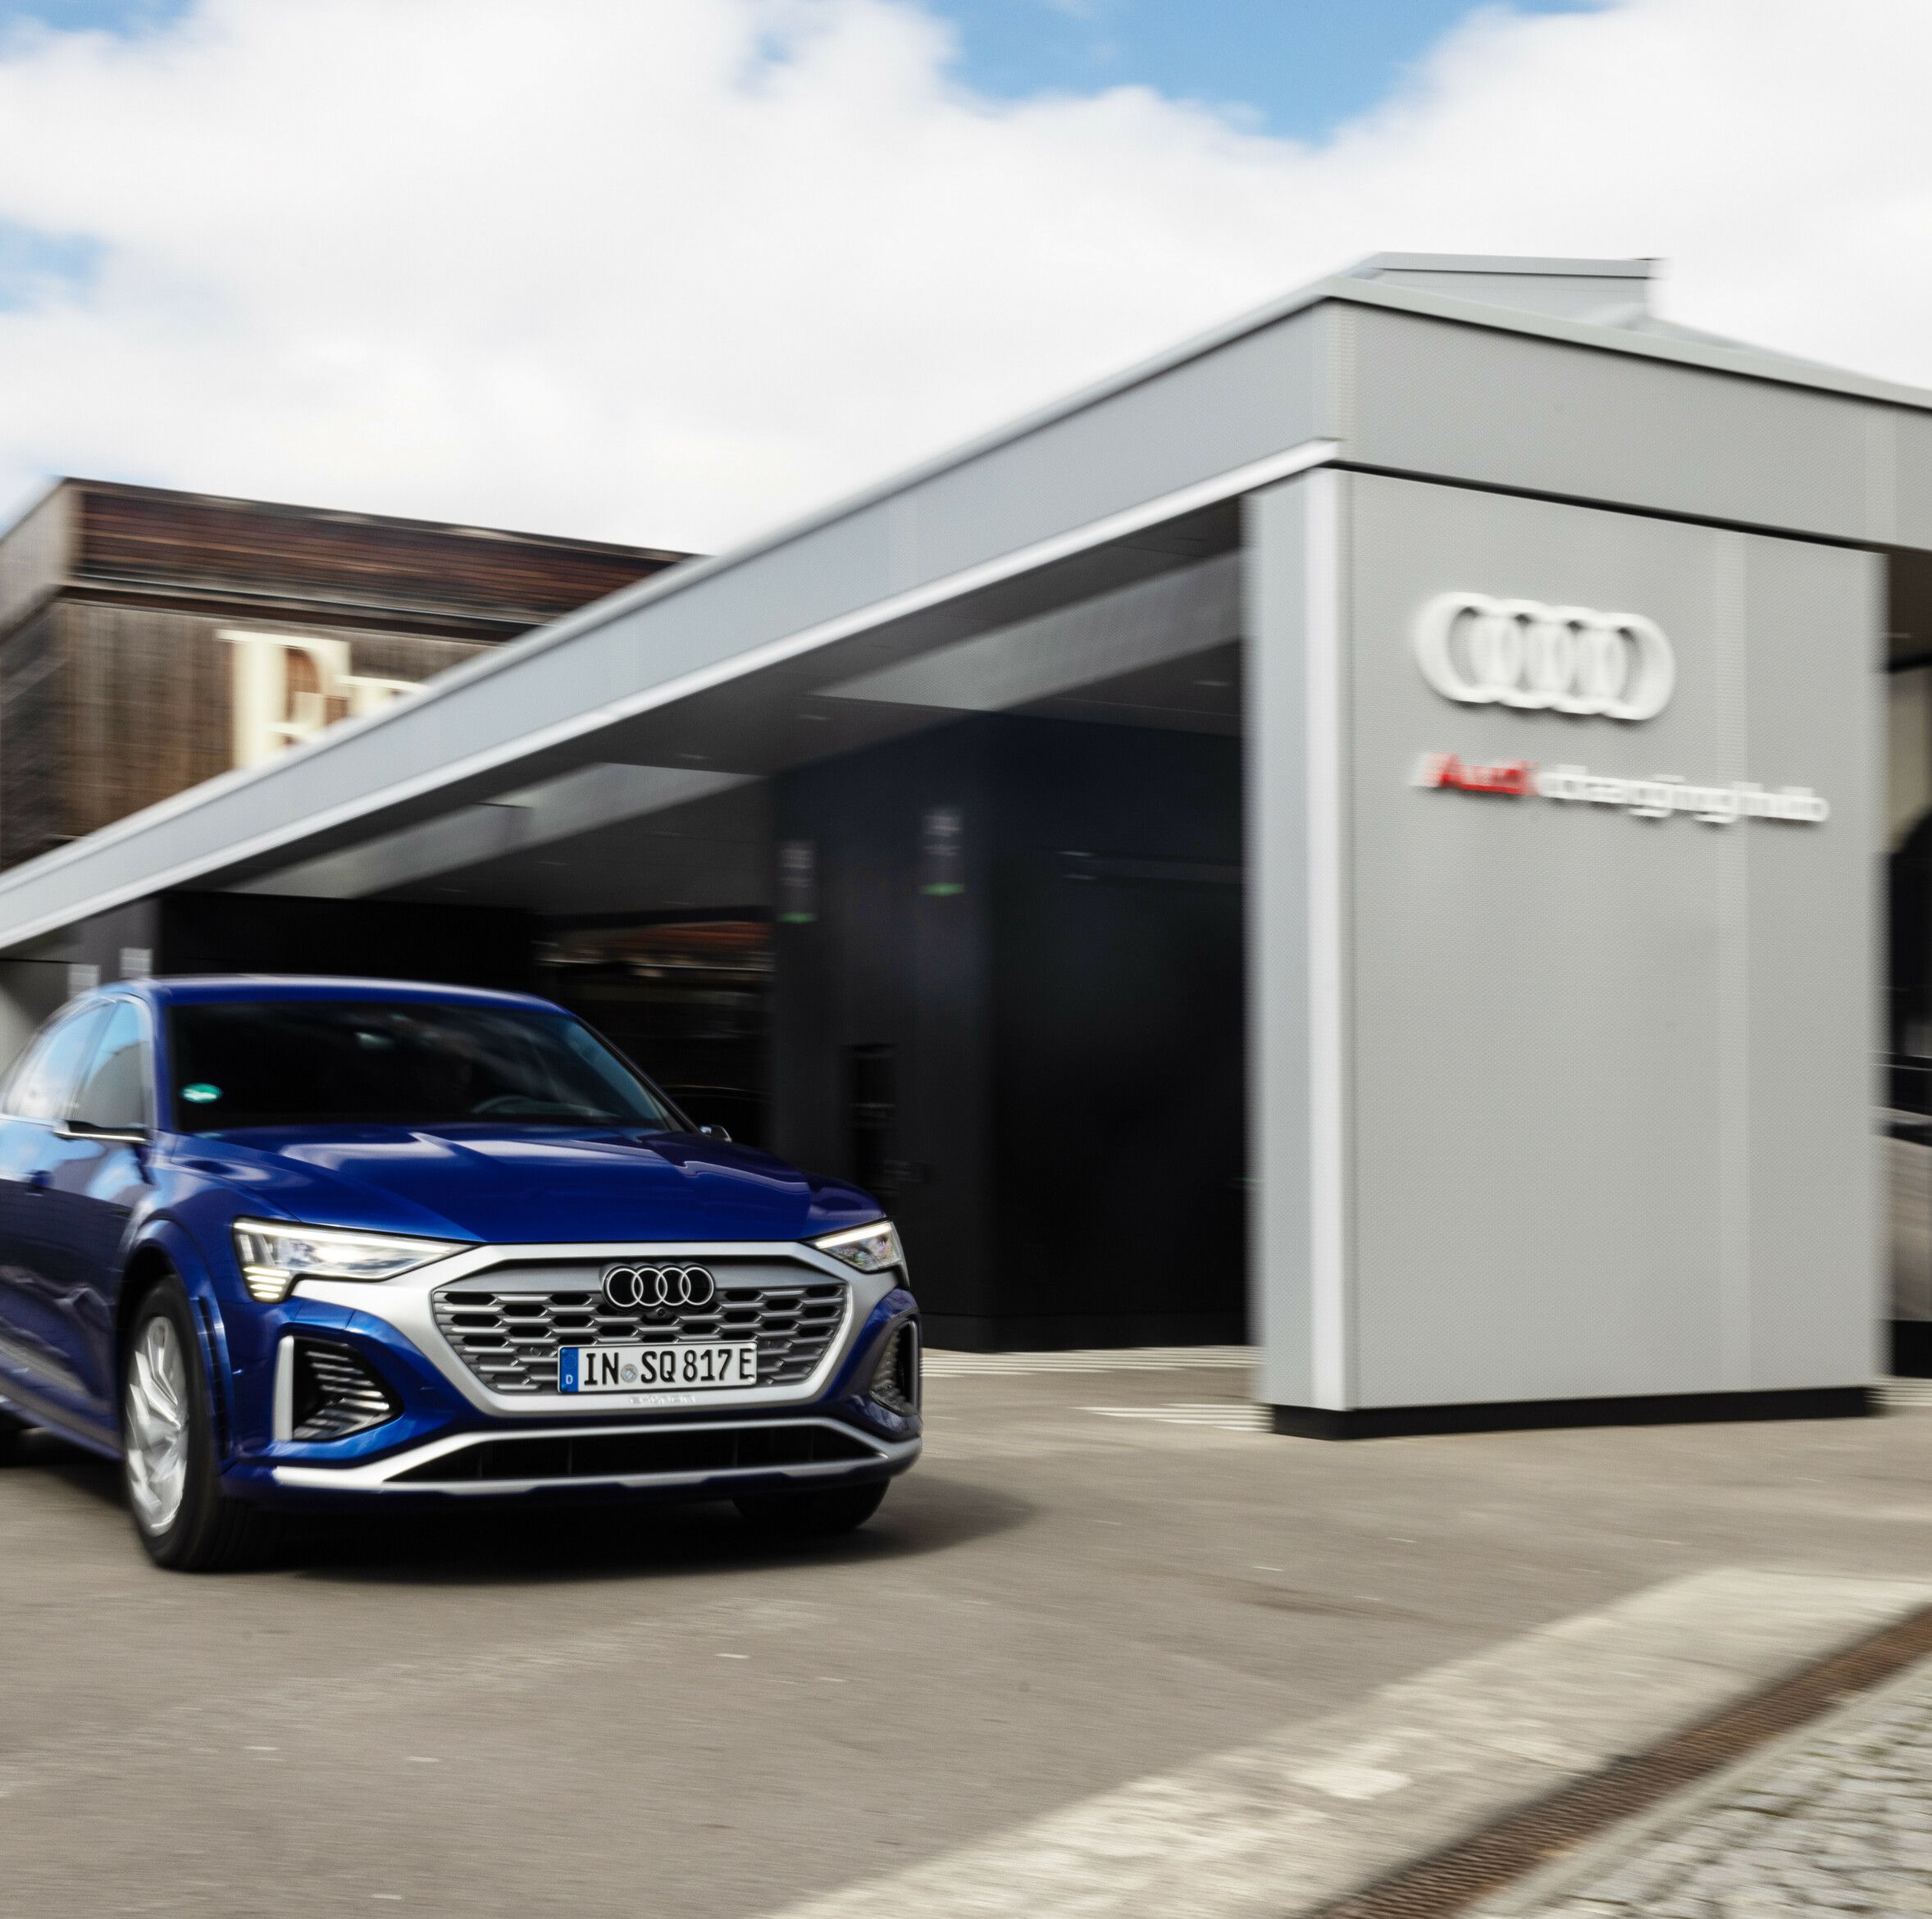 Audi's Luxury Charging Hub Expanding—Just Not Here